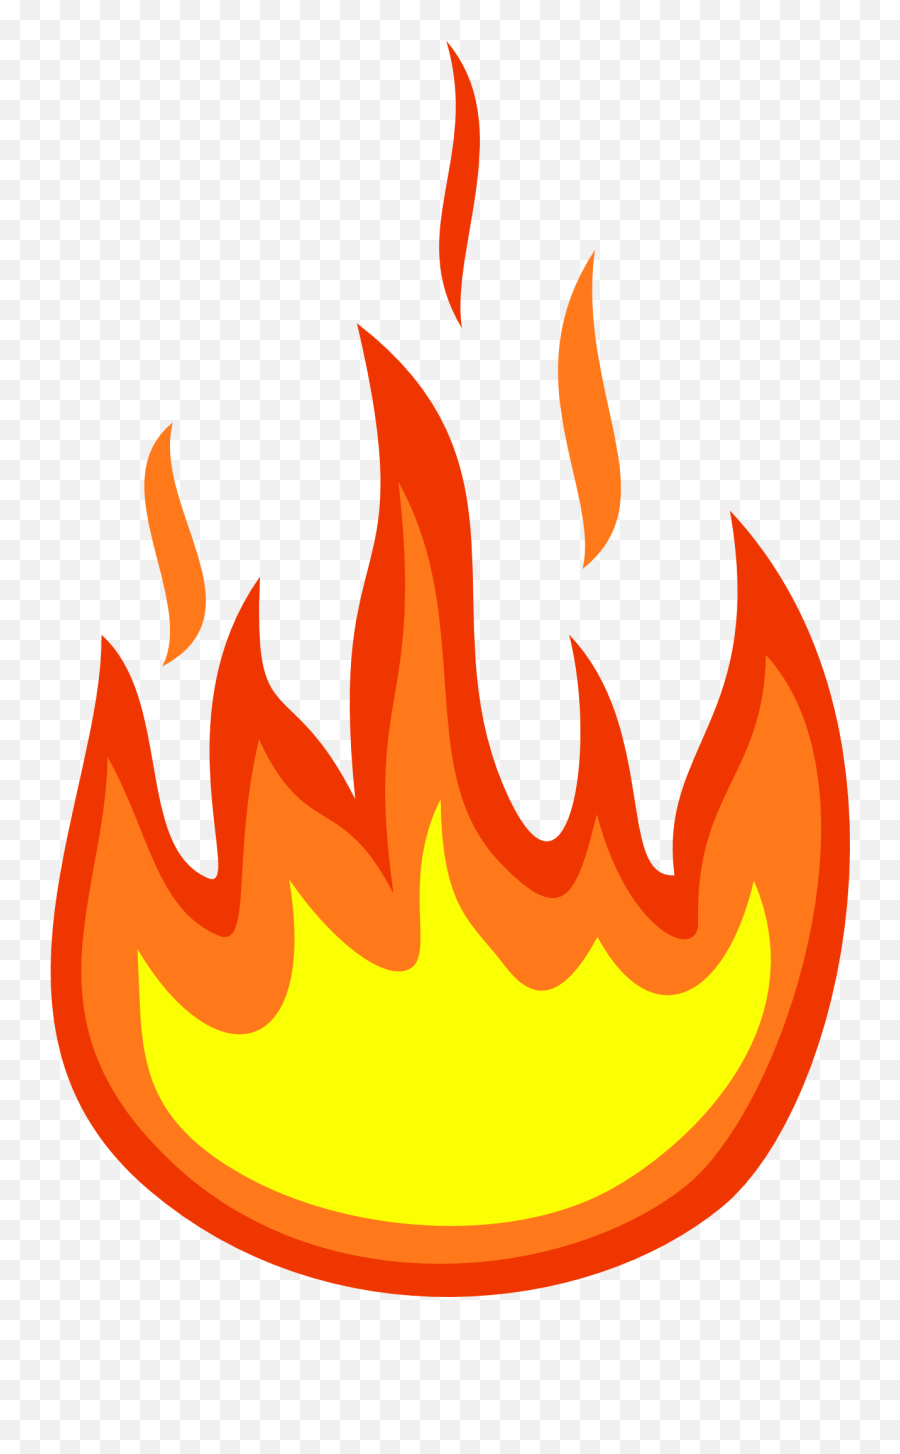 Flame Clipart Little Flame Little - Mlp Flame Cutie Mark Emoji,Flame Emoticon